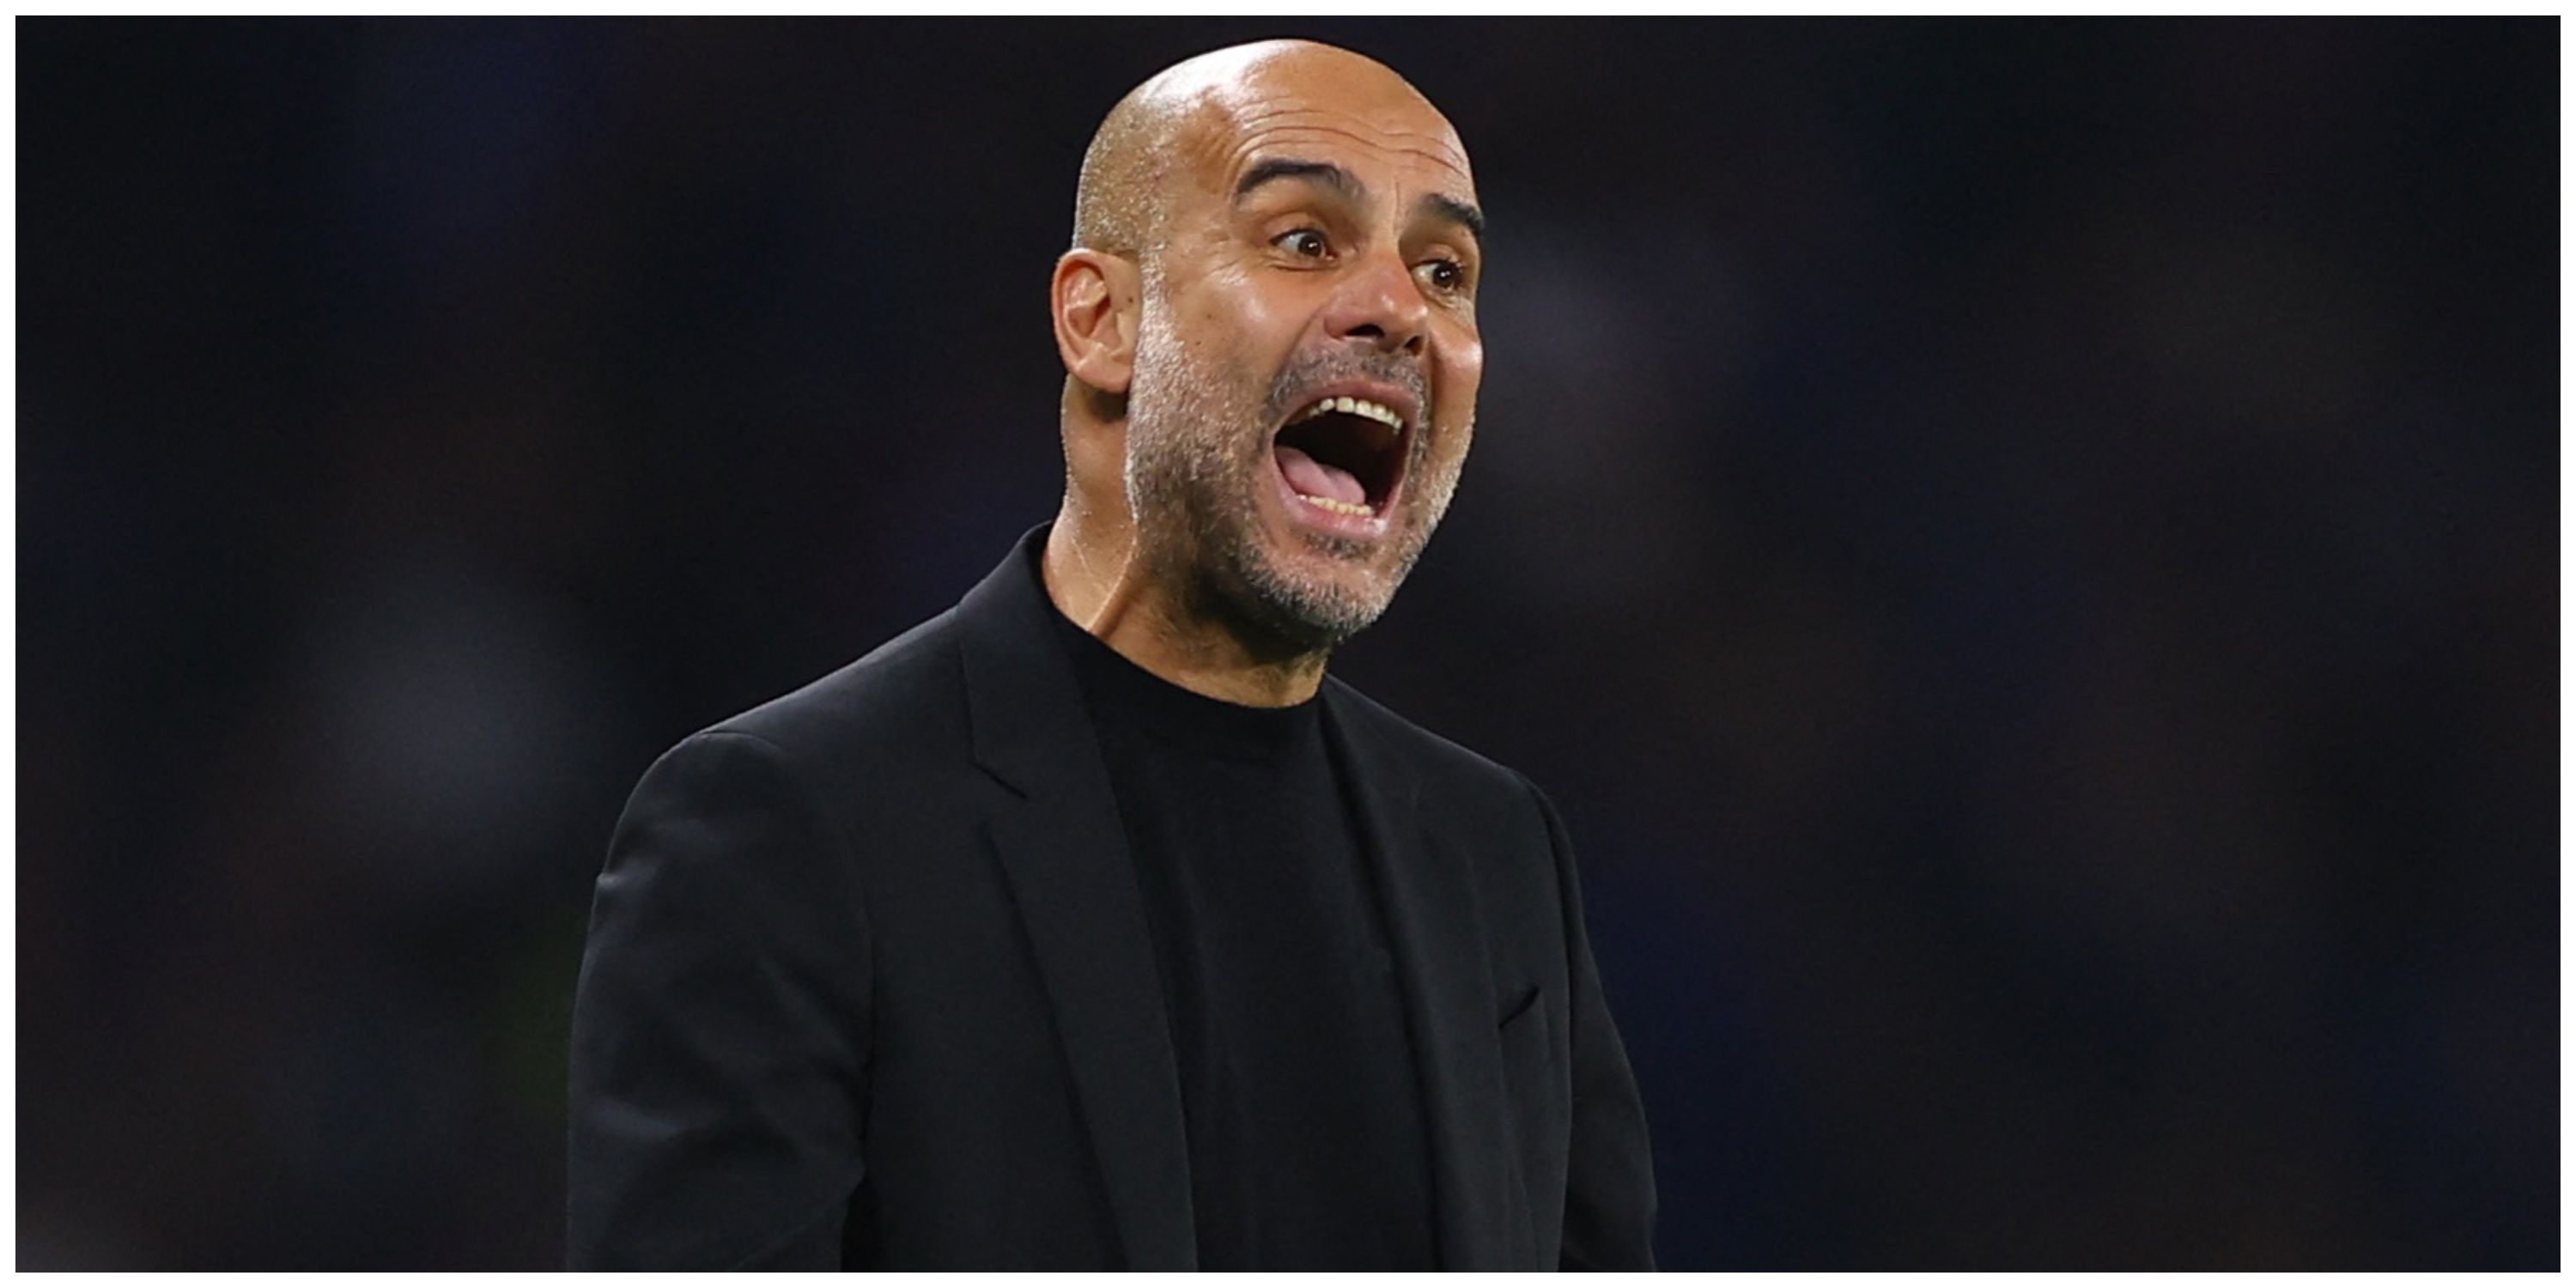 Manchester City manager Pep Guardiola with mouth wide open